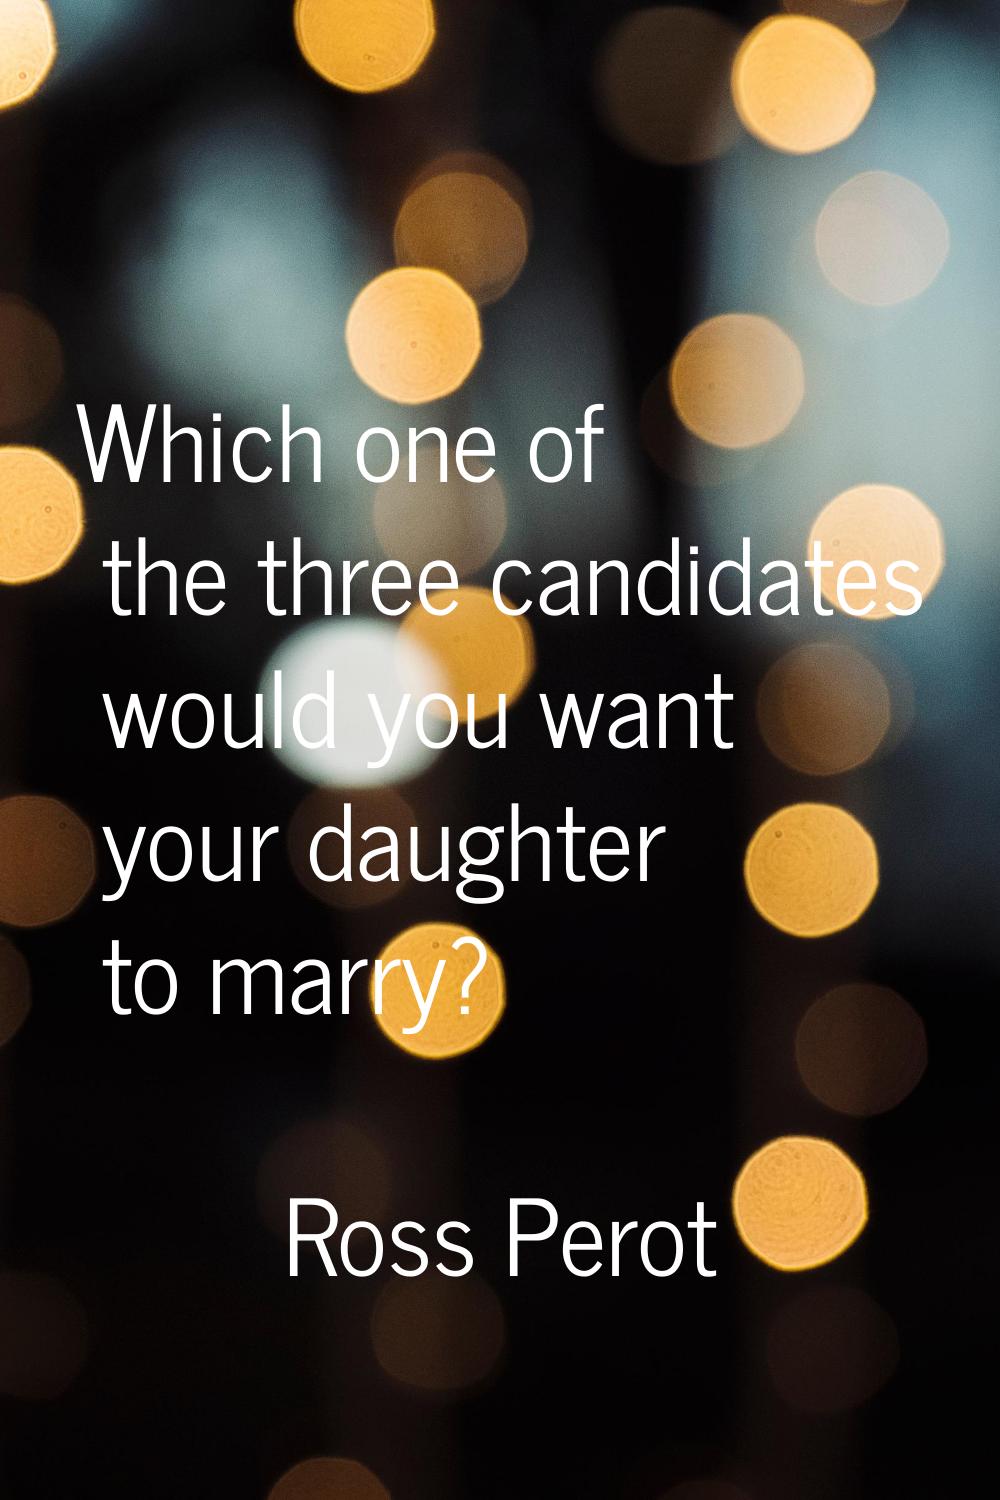 Which one of the three candidates would you want your daughter to marry?